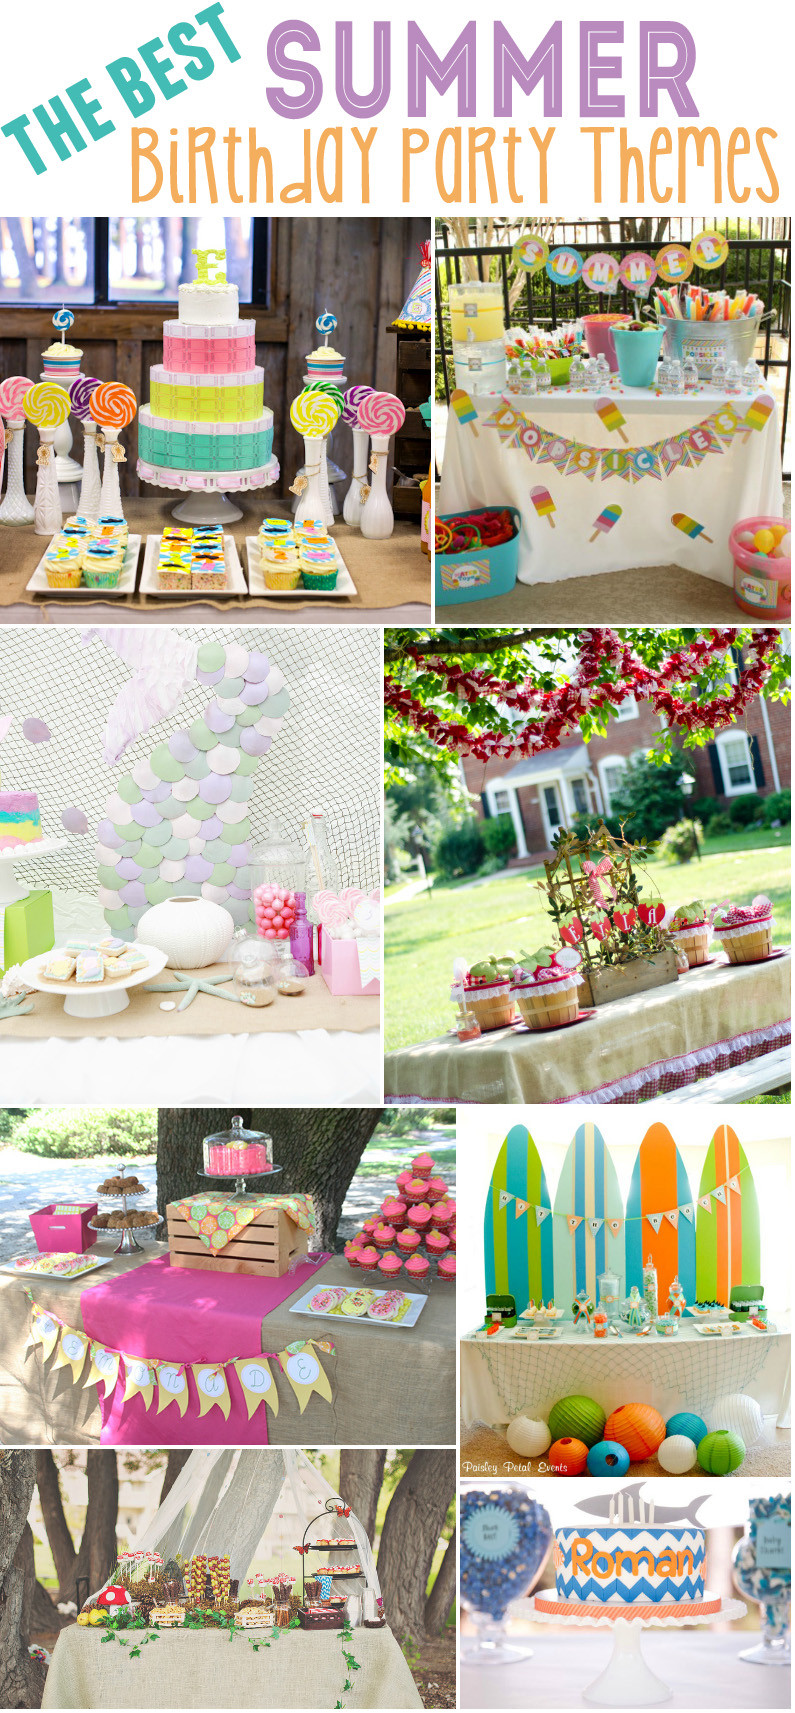 Summer Party Theme Ideas
 15 Best Summer Birthday Party Themes Design Dazzle